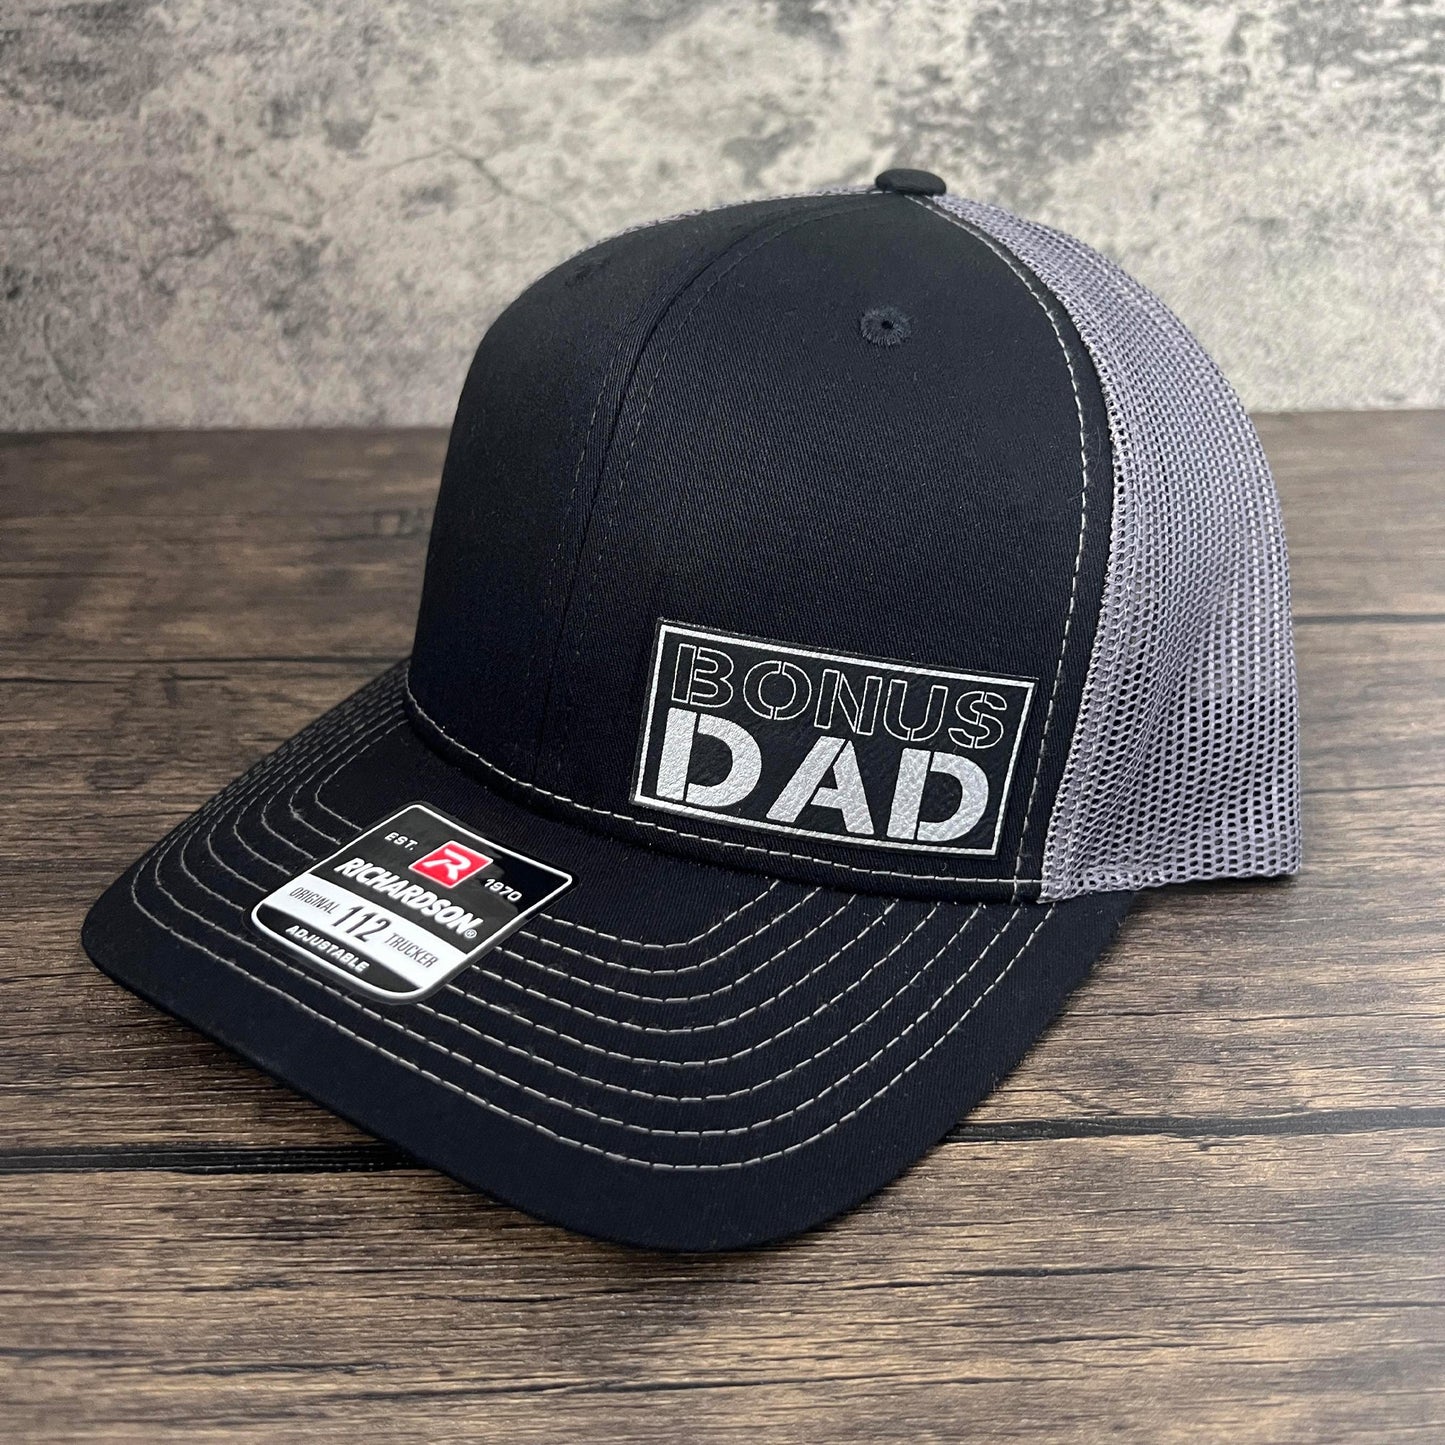 Bonus Dad Hat Gift for Step Dad on Fathers Day - Richardson 112